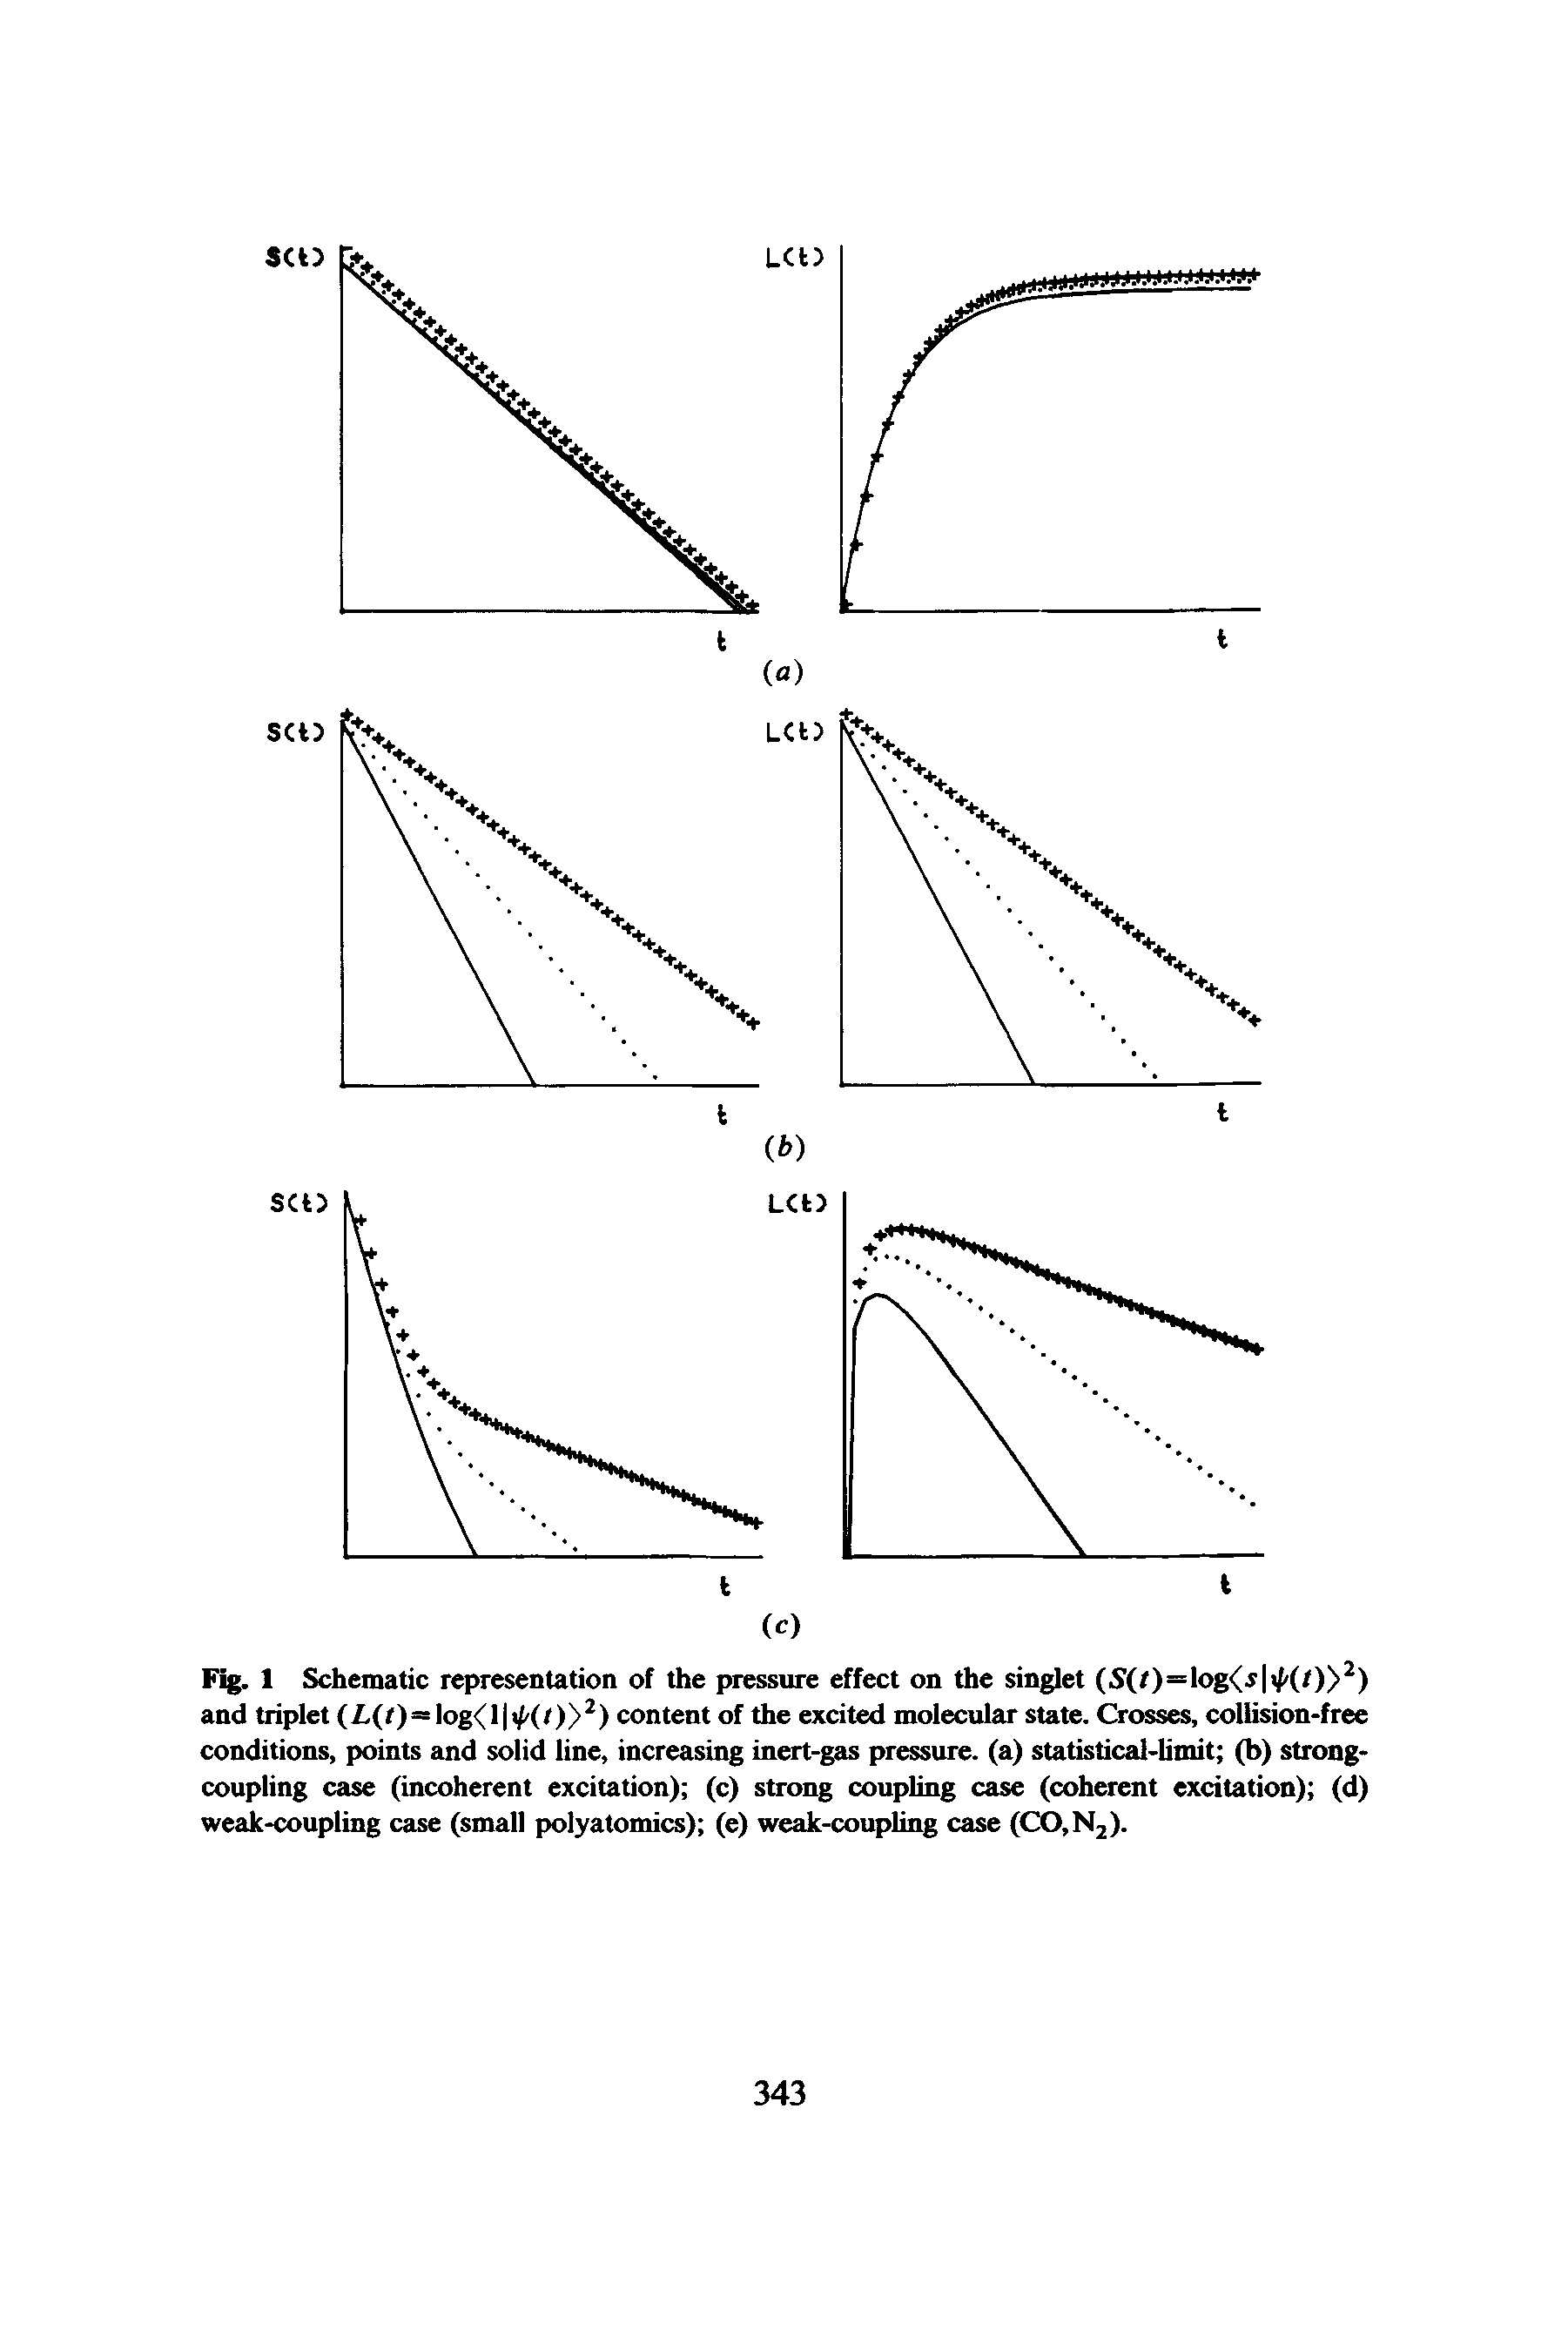 Fig. 1 Schematic representation of the pressure effect on the singlet (S(r)=log<(s ip(r)) ) and triplet (/-(r)=log<l </ (/)> ) content of the excited molecular state. Crosses, collision-free conditions, points and solid line, increasing inert-gas pressure, (a) statistical-limit (b) strongcoupling case (incoherent excitation) (c) strong coupling case (coherent excitation) (d) weak-coupling case (small polyatomics) (e) weak-coupling case (CO,N2).